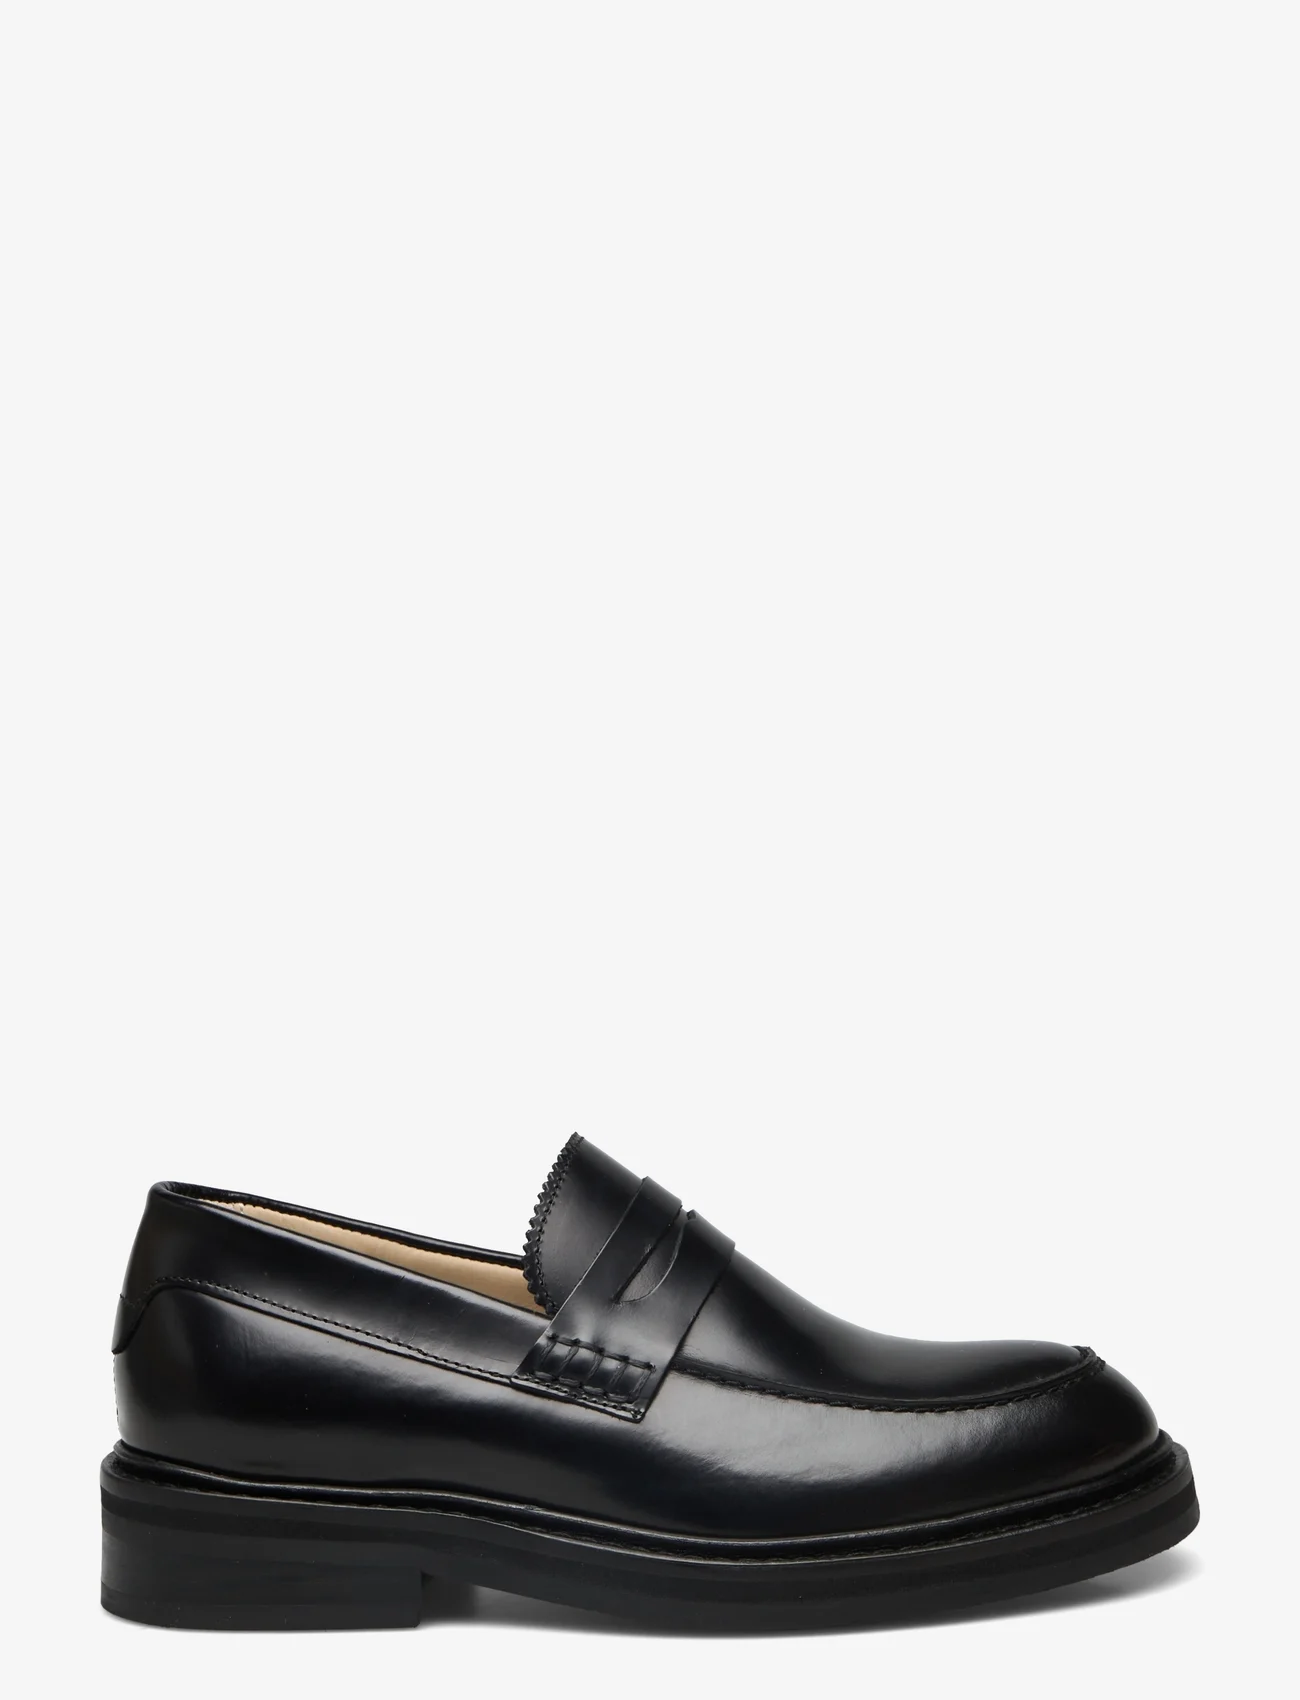 Selected Femme - SLFCAMILLE POLIDO PENNY LOAFER - birthday gifts - black - 1